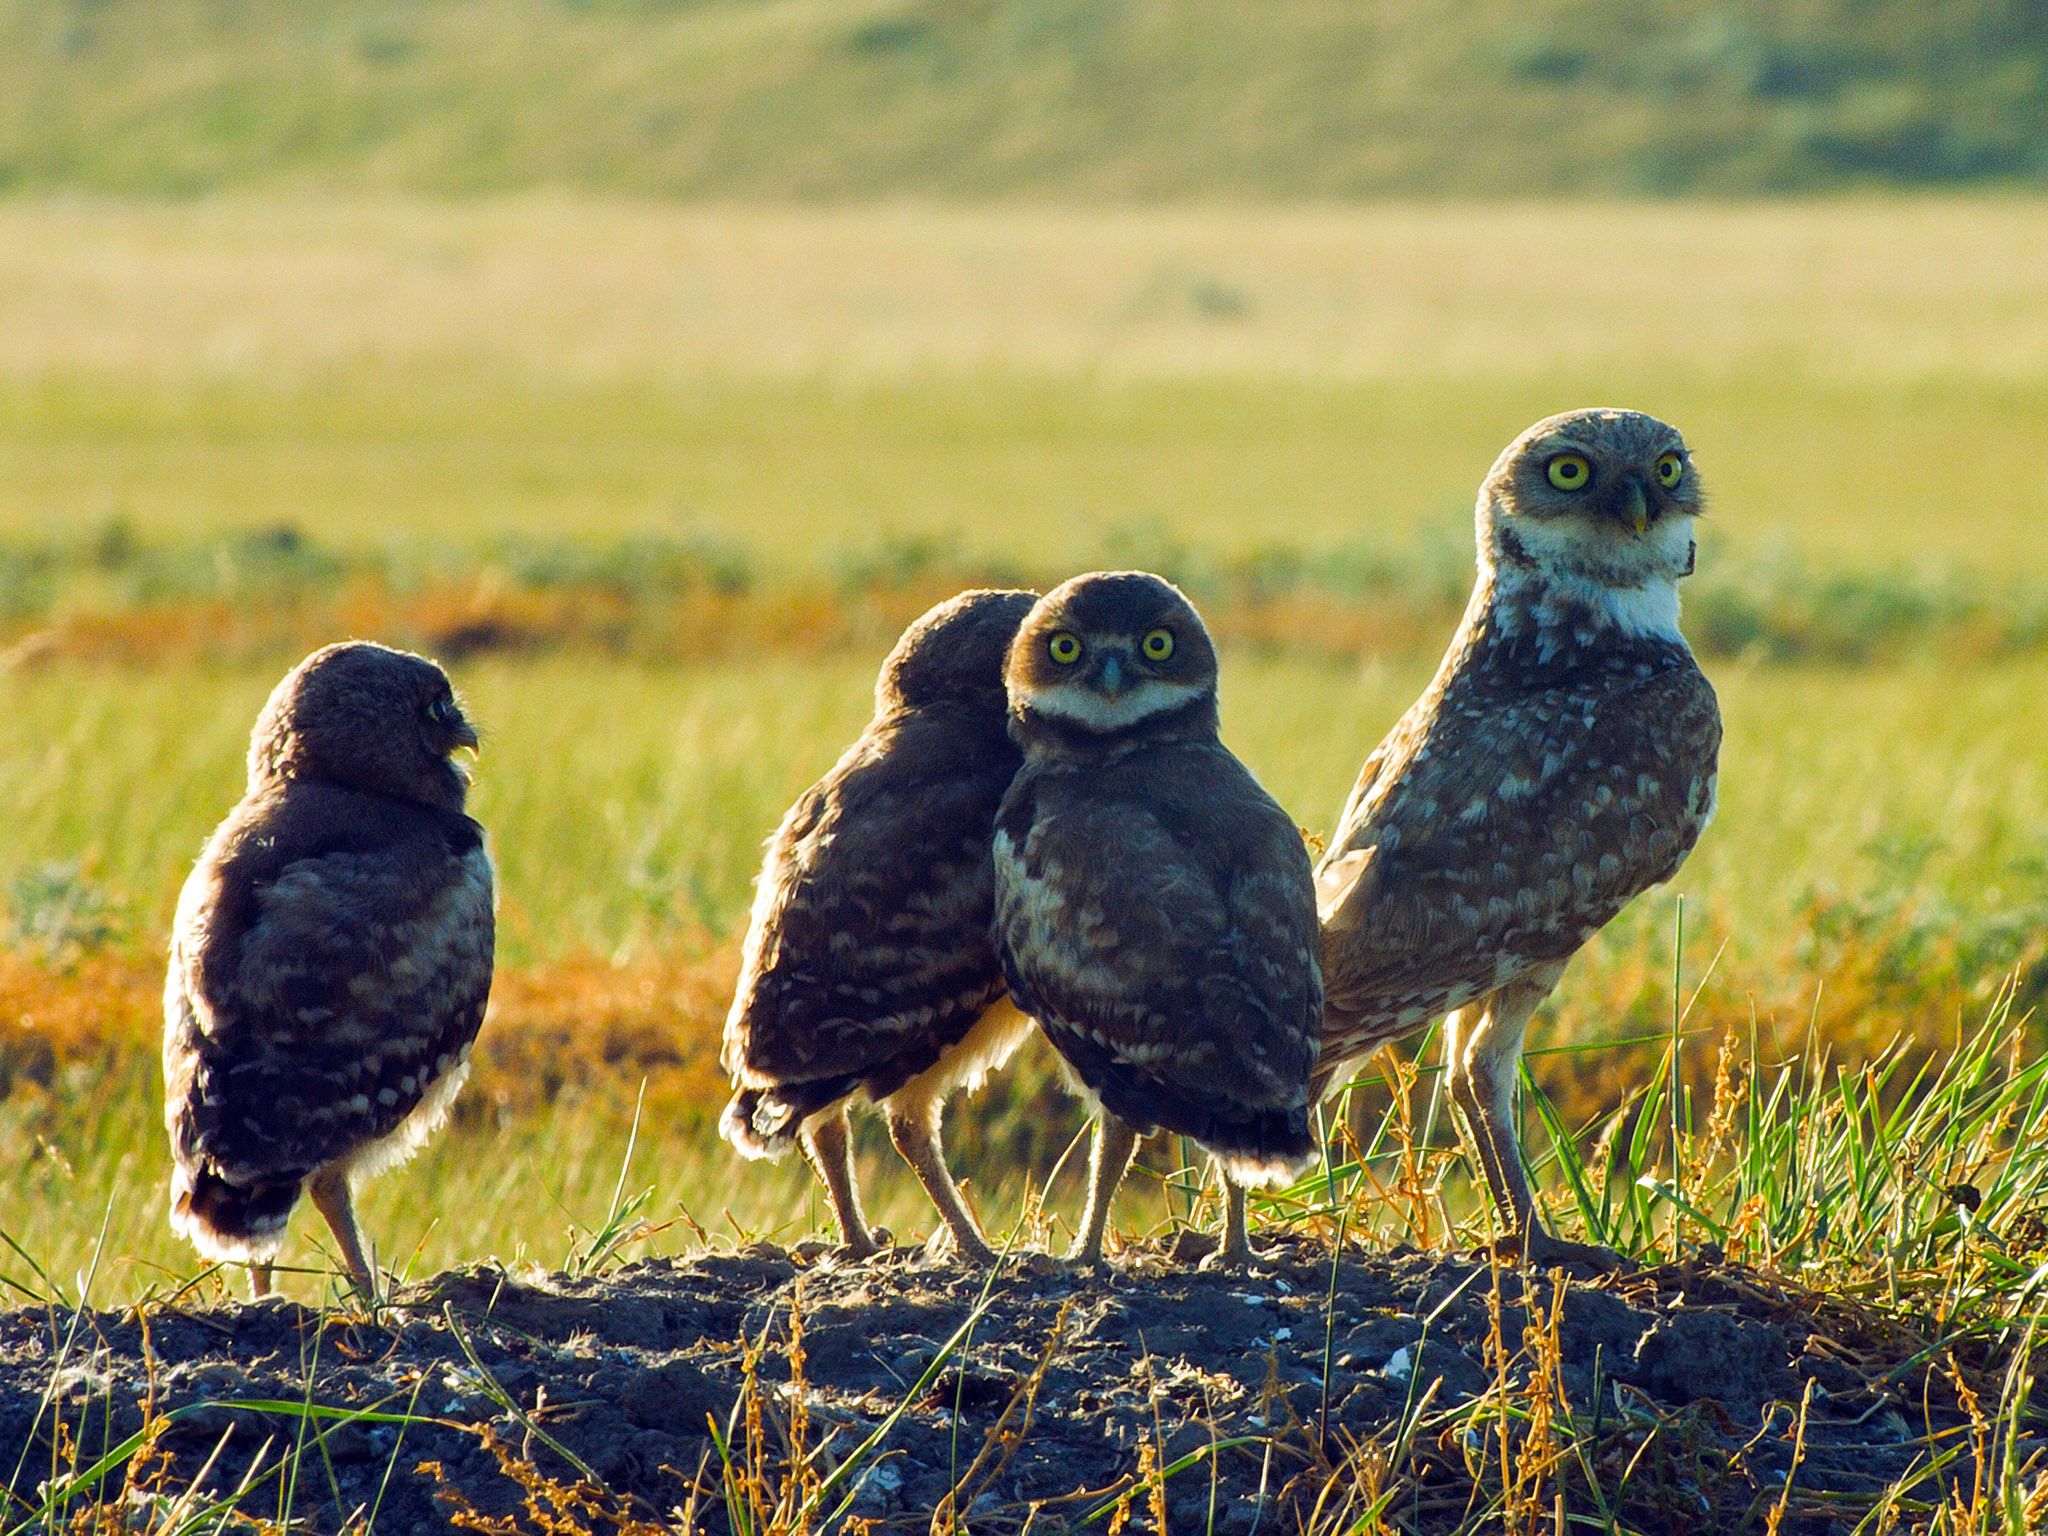 Burrowing owl adult and 3 chicks. This image is from Wild Canada. [Photo of the day - October 2014]